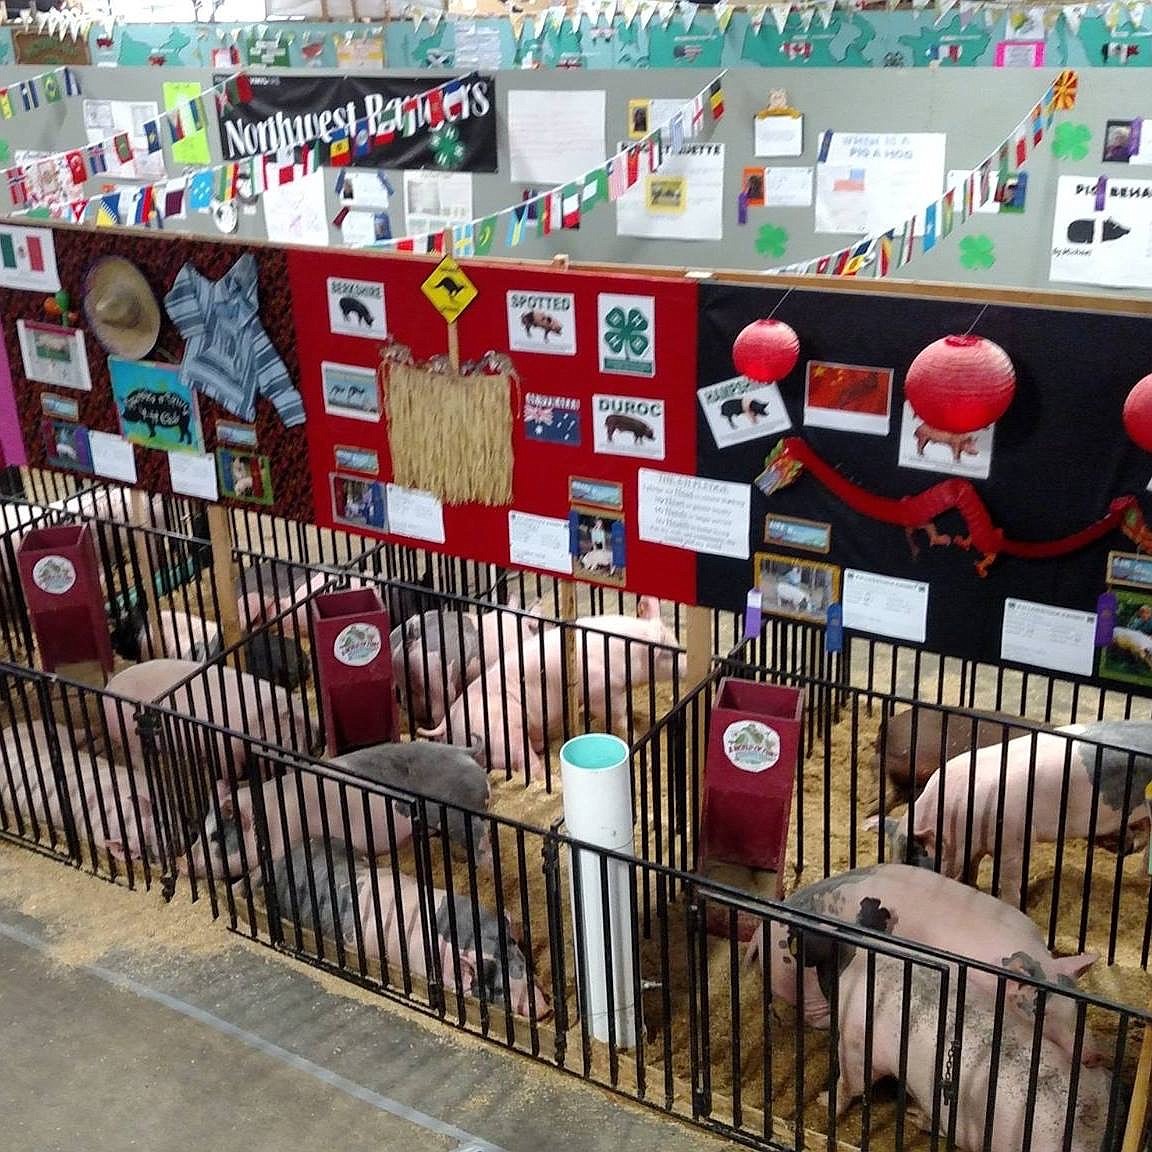 Pigs are housed in pens formed by panels at the Kootenai County Fairgrounds during the 2017 North Idaho State Fair. (Courtesy photo)